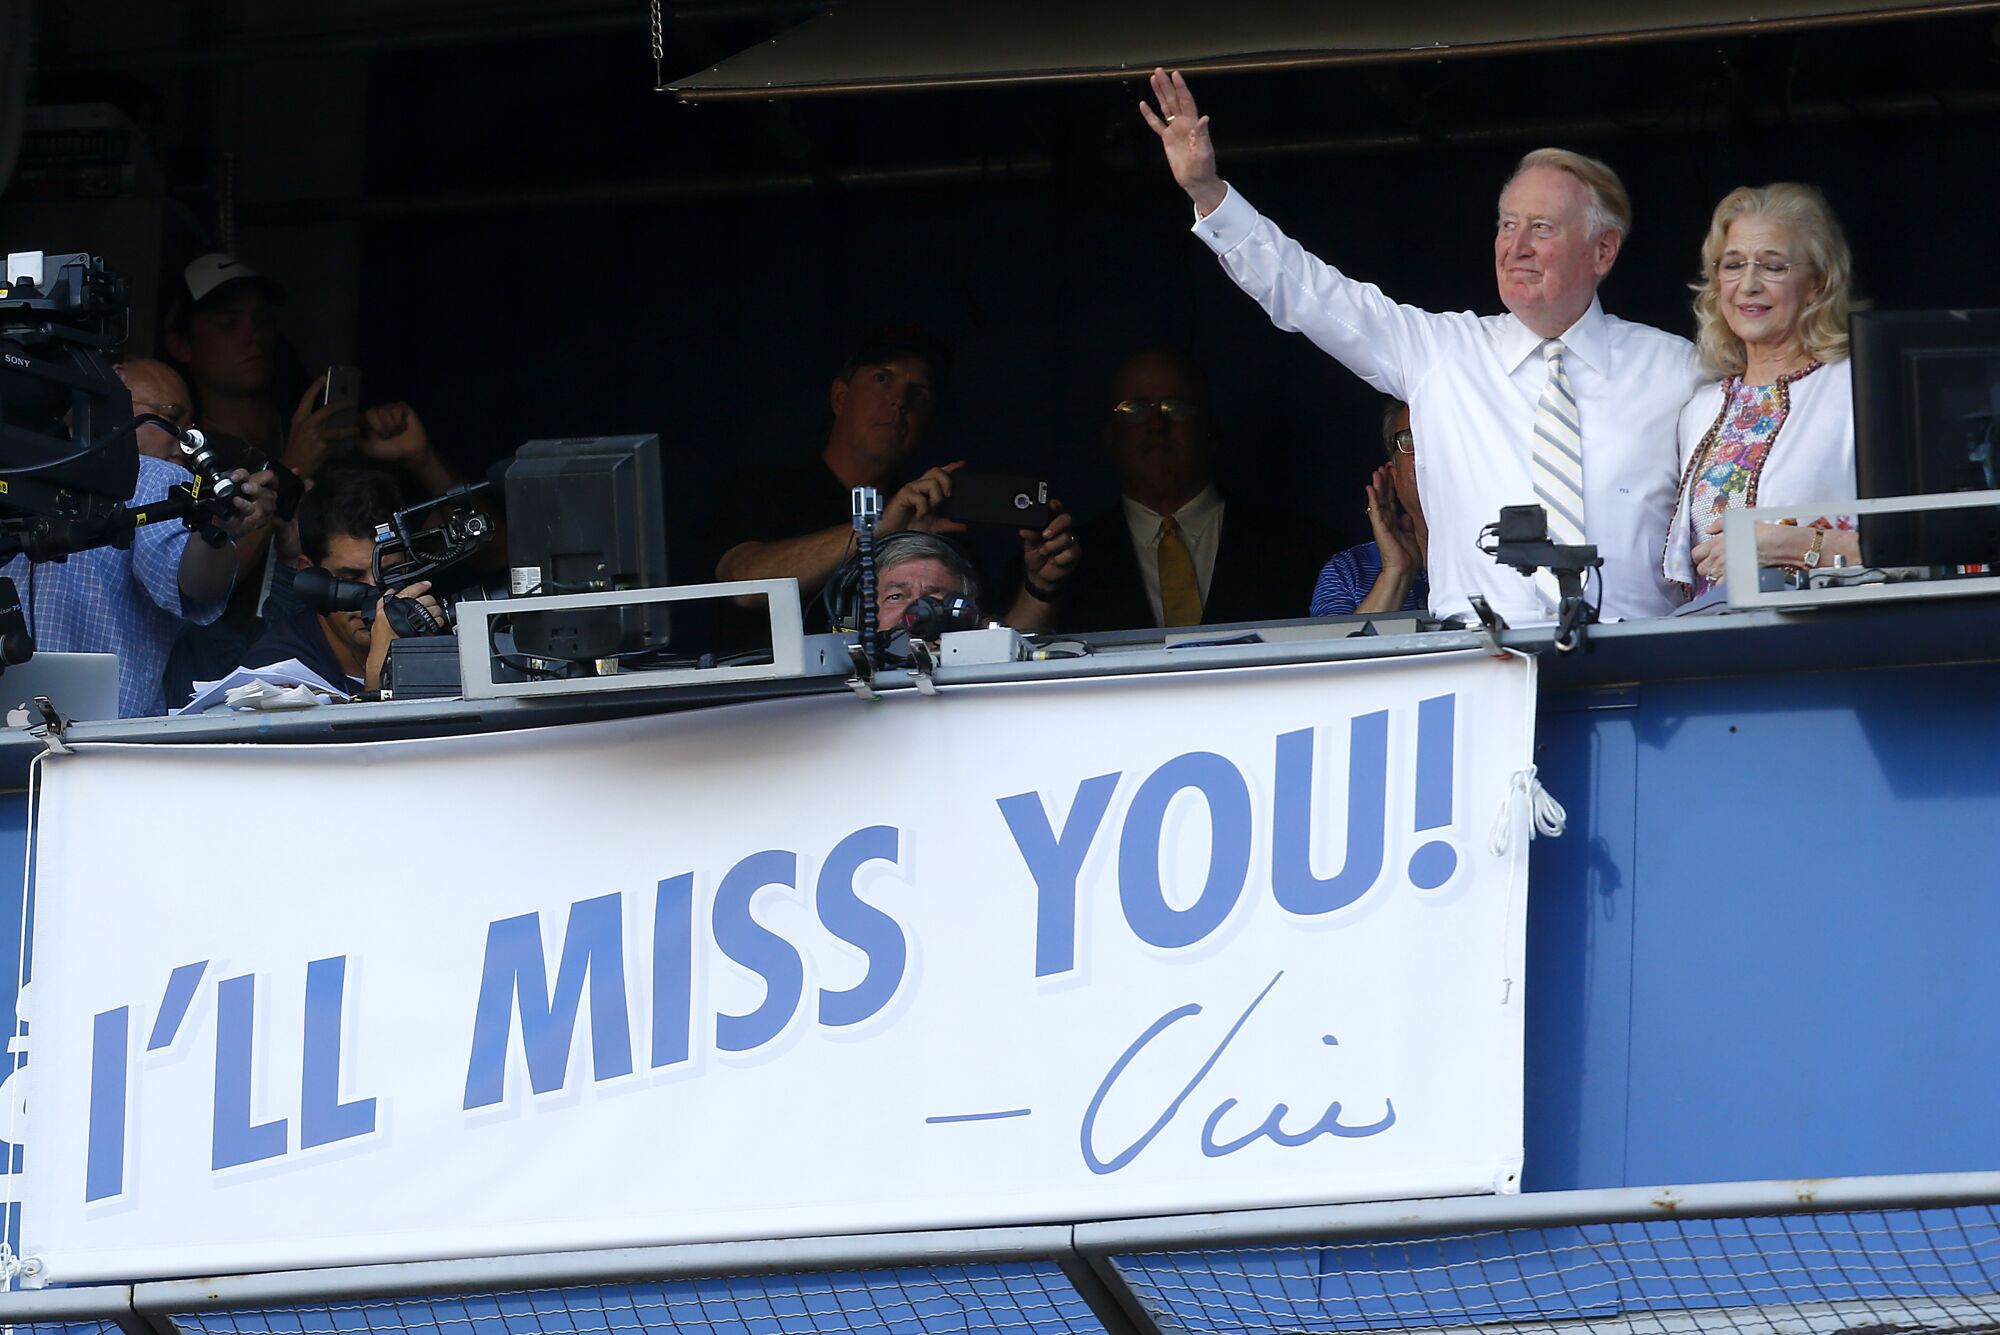 Dodgers announcer Vin Scully, with wife Sandra, waves to the fans after his final game.